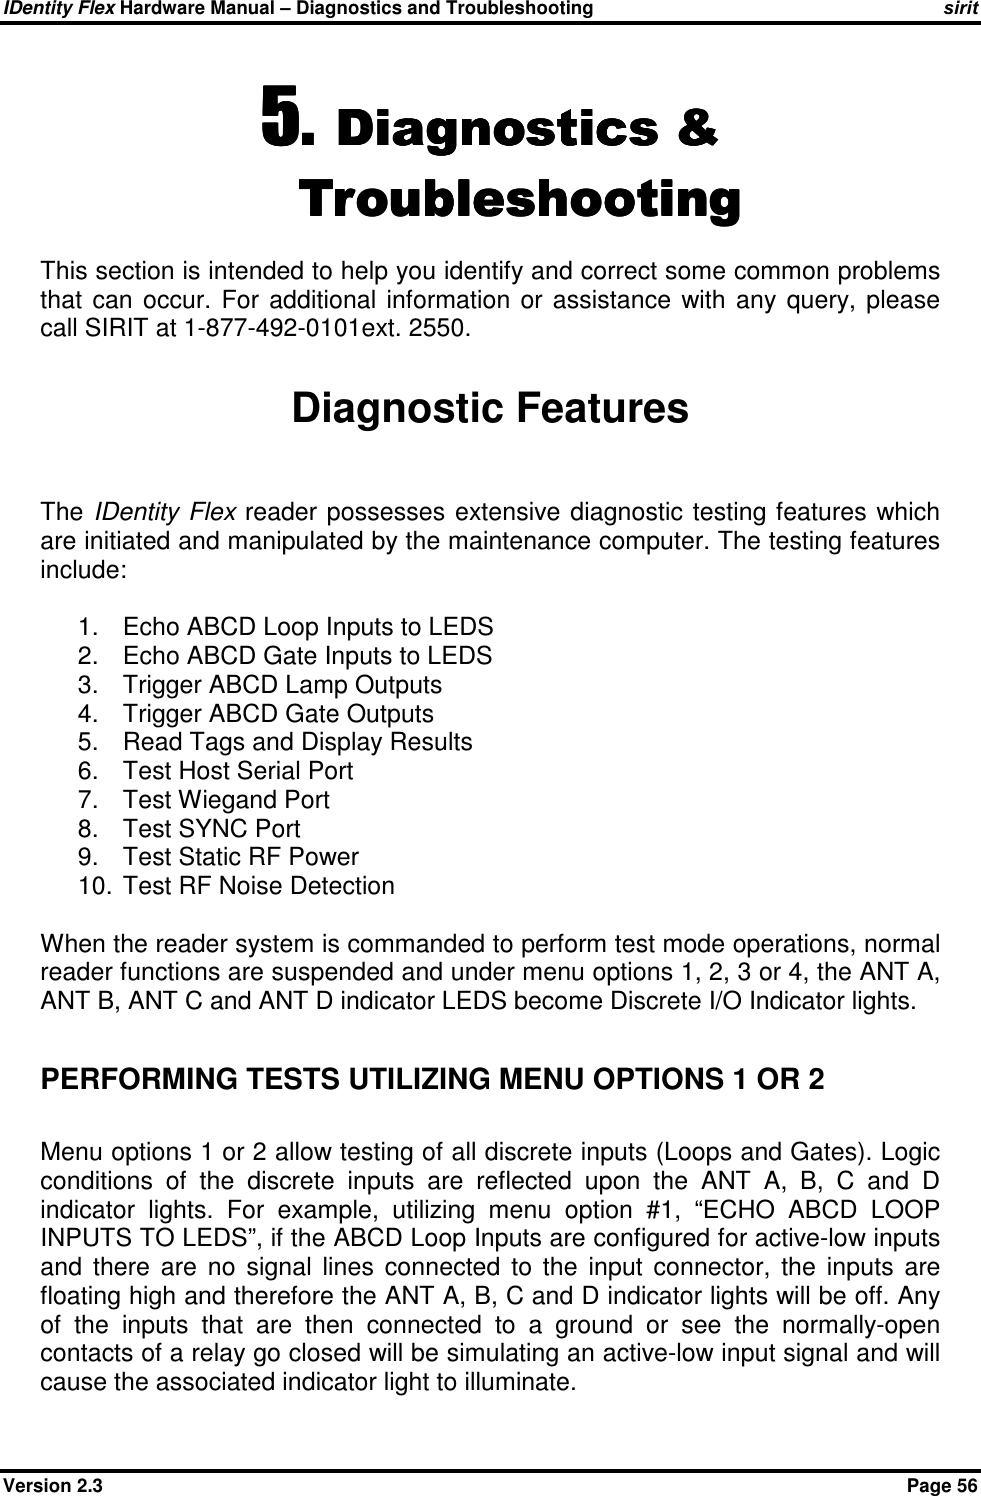 IDentity Flex Hardware Manual – Diagnostics and Troubleshooting sirit Version 2.3    Page 56 5.5.5.5. Diagnostics &amp; Diagnostics &amp; Diagnostics &amp; Diagnostics &amp; TroubleshootingTroubleshootingTroubleshootingTroubleshooting    This section is intended to help you identify and correct some common problems that  can  occur.  For  additional  information  or  assistance  with  any  query,  please call SIRIT at 1-877-492-0101ext. 2550.  Diagnostic Features  The  IDentity Flex reader  possesses  extensive diagnostic testing features  which are initiated and manipulated by the maintenance computer. The testing features include:  1.  Echo ABCD Loop Inputs to LEDS 2.  Echo ABCD Gate Inputs to LEDS 3.  Trigger ABCD Lamp Outputs 4.  Trigger ABCD Gate Outputs 5.  Read Tags and Display Results 6.  Test Host Serial Port 7.  Test Wiegand Port 8.  Test SYNC Port 9.  Test Static RF Power 10.  Test RF Noise Detection  When the reader system is commanded to perform test mode operations, normal reader functions are suspended and under menu options 1, 2, 3 or 4, the ANT A, ANT B, ANT C and ANT D indicator LEDS become Discrete I/O Indicator lights.  PERFORMING TESTS UTILIZING MENU OPTIONS 1 OR 2  Menu options 1 or 2 allow testing of all discrete inputs (Loops and Gates). Logic conditions  of  the  discrete  inputs  are  reflected  upon  the  ANT  A,  B,  C  and  D indicator  lights.  For  example,  utilizing  menu  option  #1,  “ECHO  ABCD  LOOP INPUTS TO LEDS”, if the ABCD Loop Inputs are configured for active-low inputs and  there  are  no  signal  lines  connected  to  the  input  connector,  the  inputs  are floating high and therefore the ANT A, B, C and D indicator lights will be off. Any of  the  inputs  that  are  then  connected  to  a  ground  or  see  the  normally-open contacts of a relay go closed will be simulating an active-low input signal and will cause the associated indicator light to illuminate.  